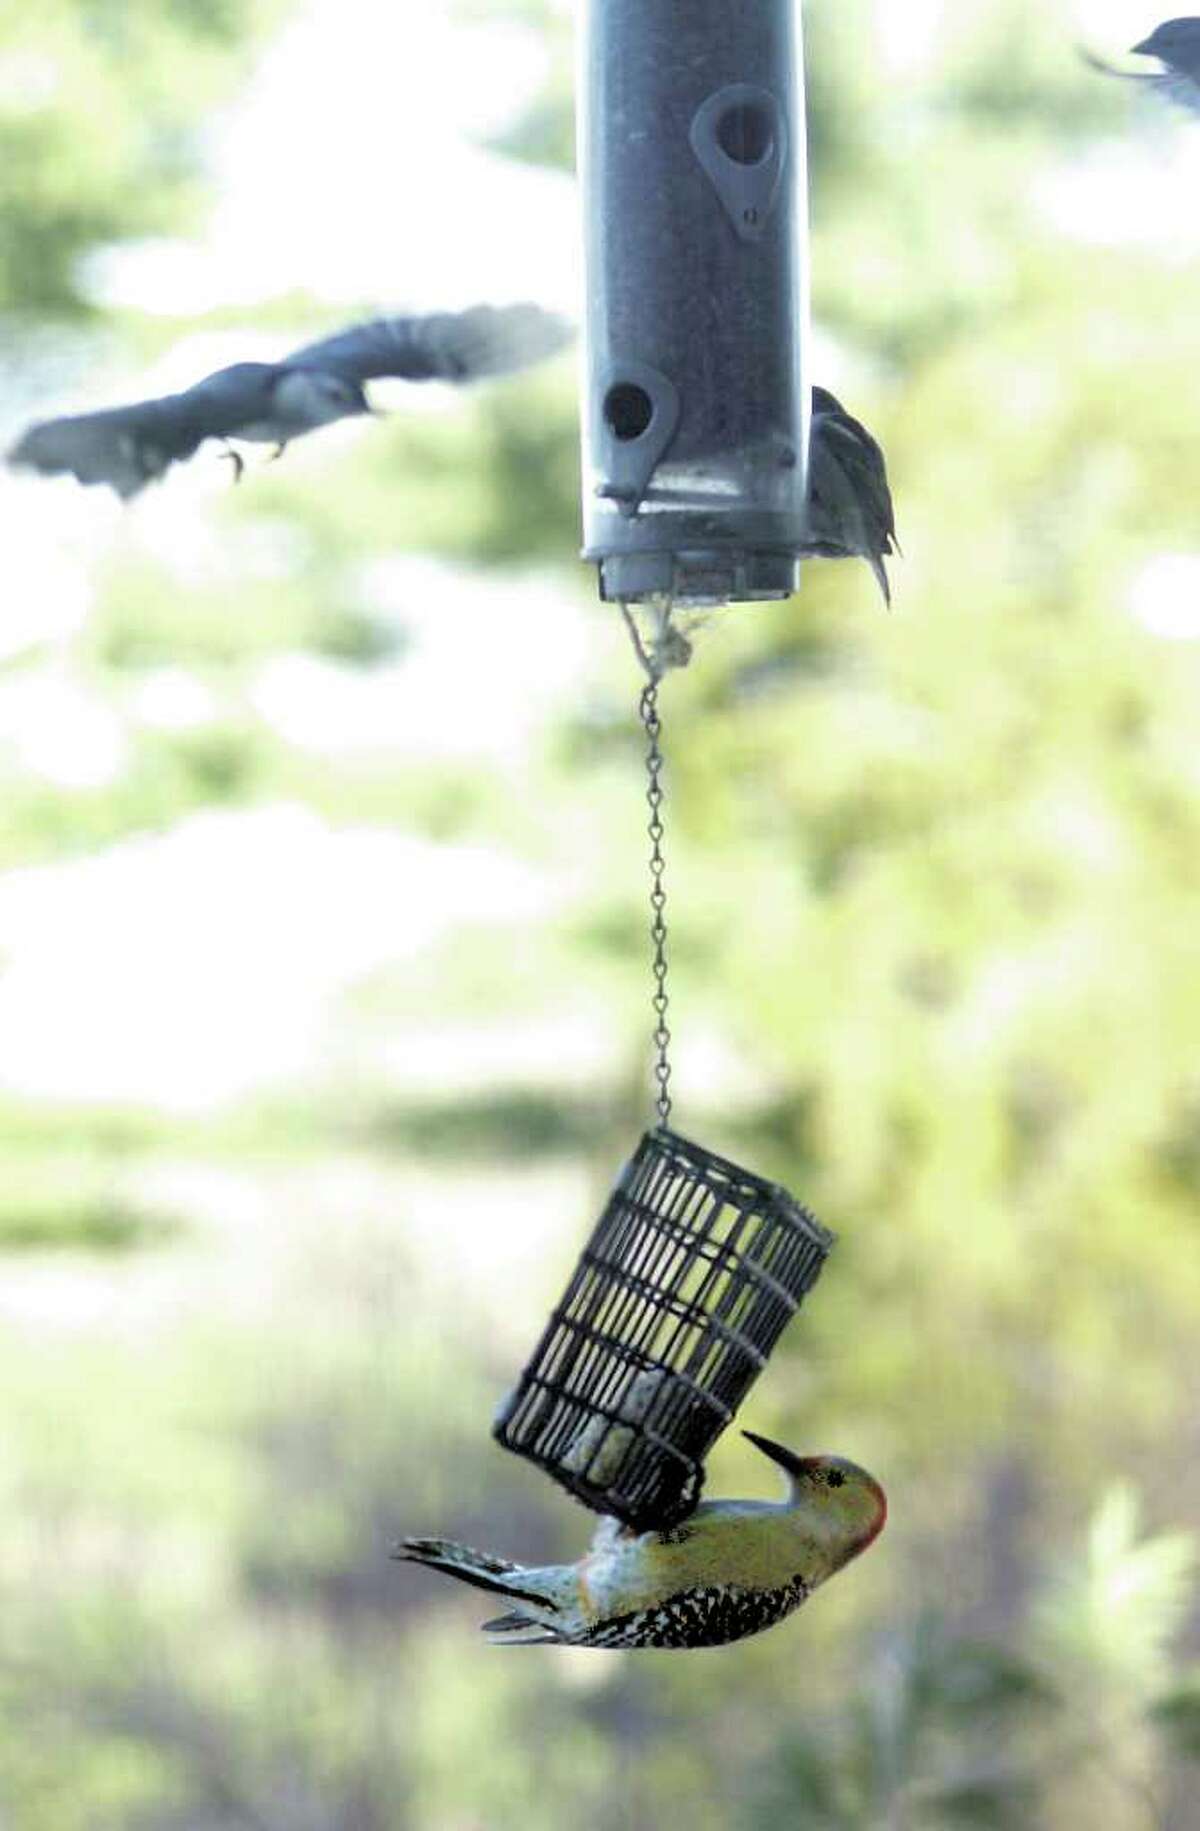 A white breasted nuthatch flies toward a feeder while a female red-bellied woodpecker works at some suet. People all over the United States and Canada will have a chance to record the birds they find at their feeders, as part of the Great Backyard Bird Count, Feb. 18-21.